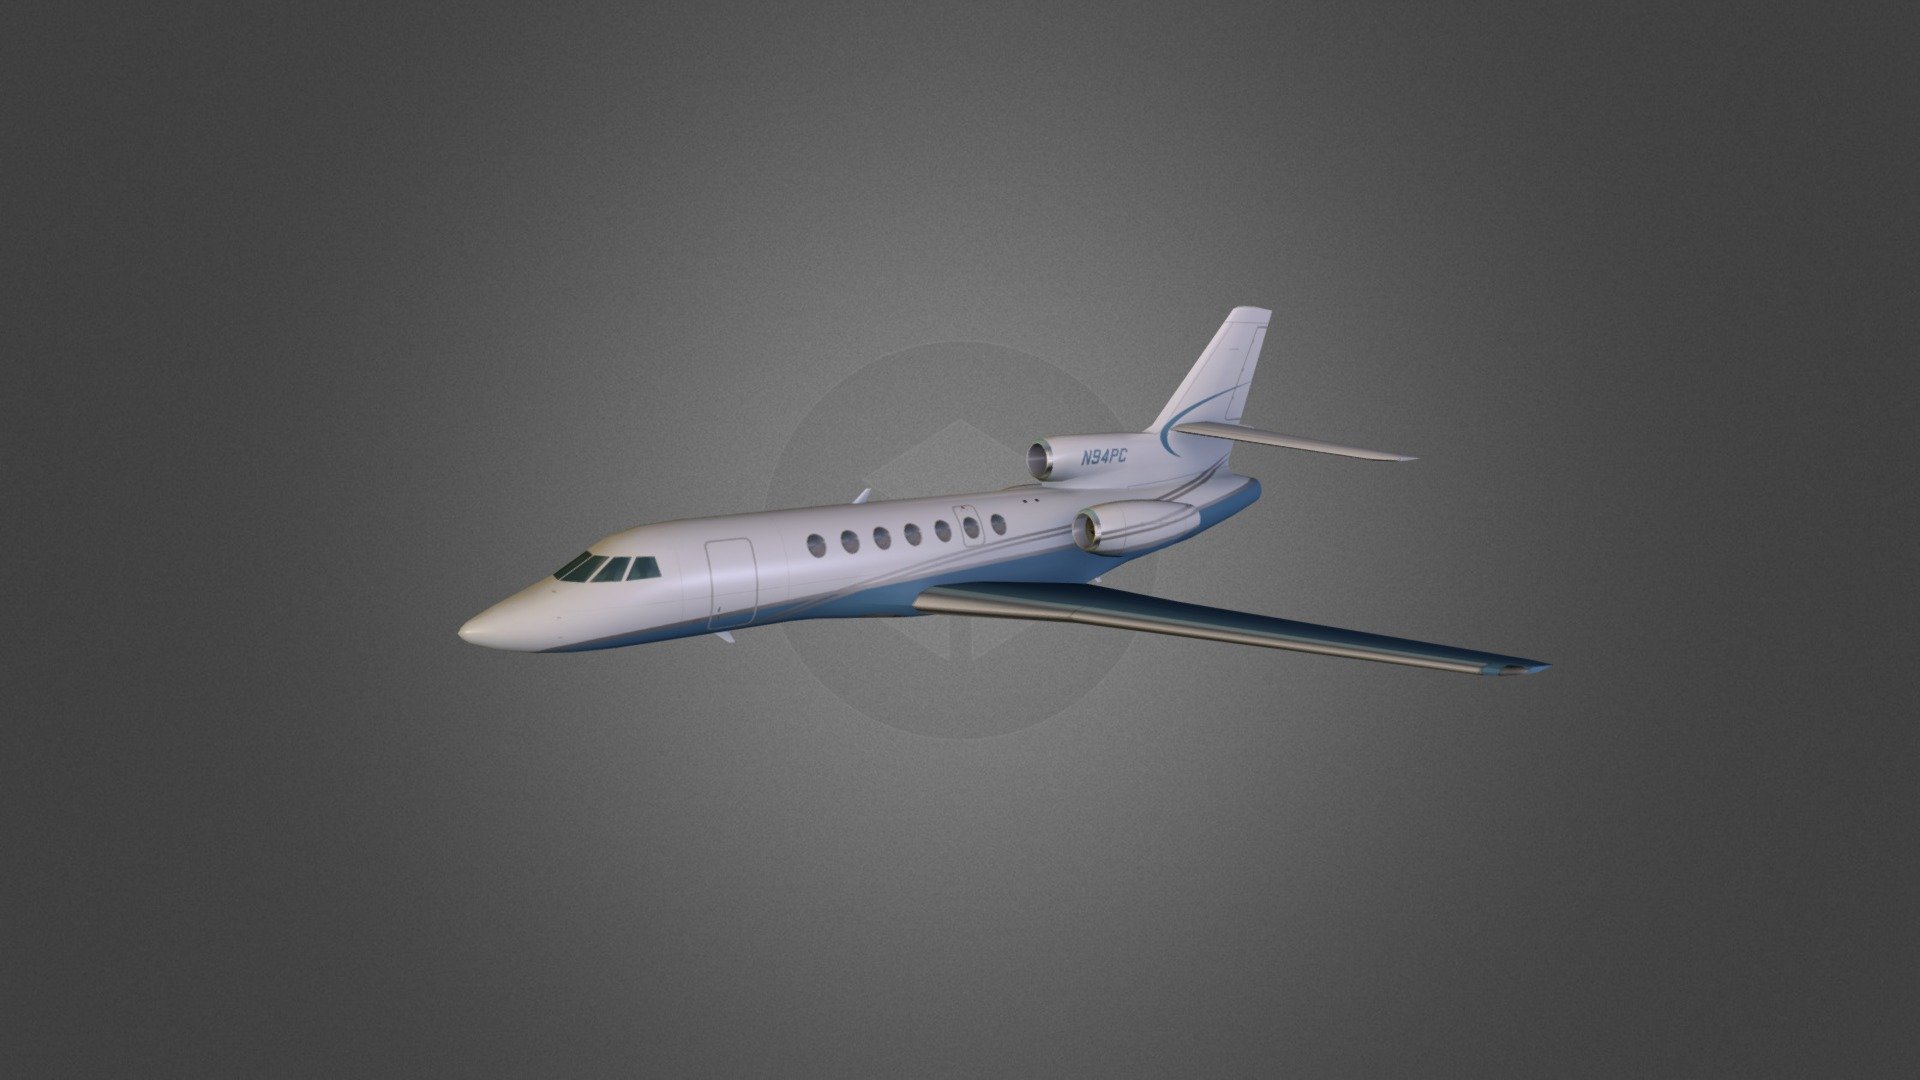 The Dassault Falcon 50 is a French-built mid-sized, long-range corporate jet, featuring a three jet engine layout with a S-duct central engine. It has the same fuselage cross section and similar capacity as the earlier Falcon 20 twinjet but is a completely new design that includes a more advanced wing design.

Product Features:
- The windows are part of the texture map and the transparency can not be adjusted.
- Does not include an interior.
- Does not include any grouping information.
- Does not include landing gear.
- Only has one material.
- The model is UV mapped and one texture (1024x1024, jpg format) is included 3d model